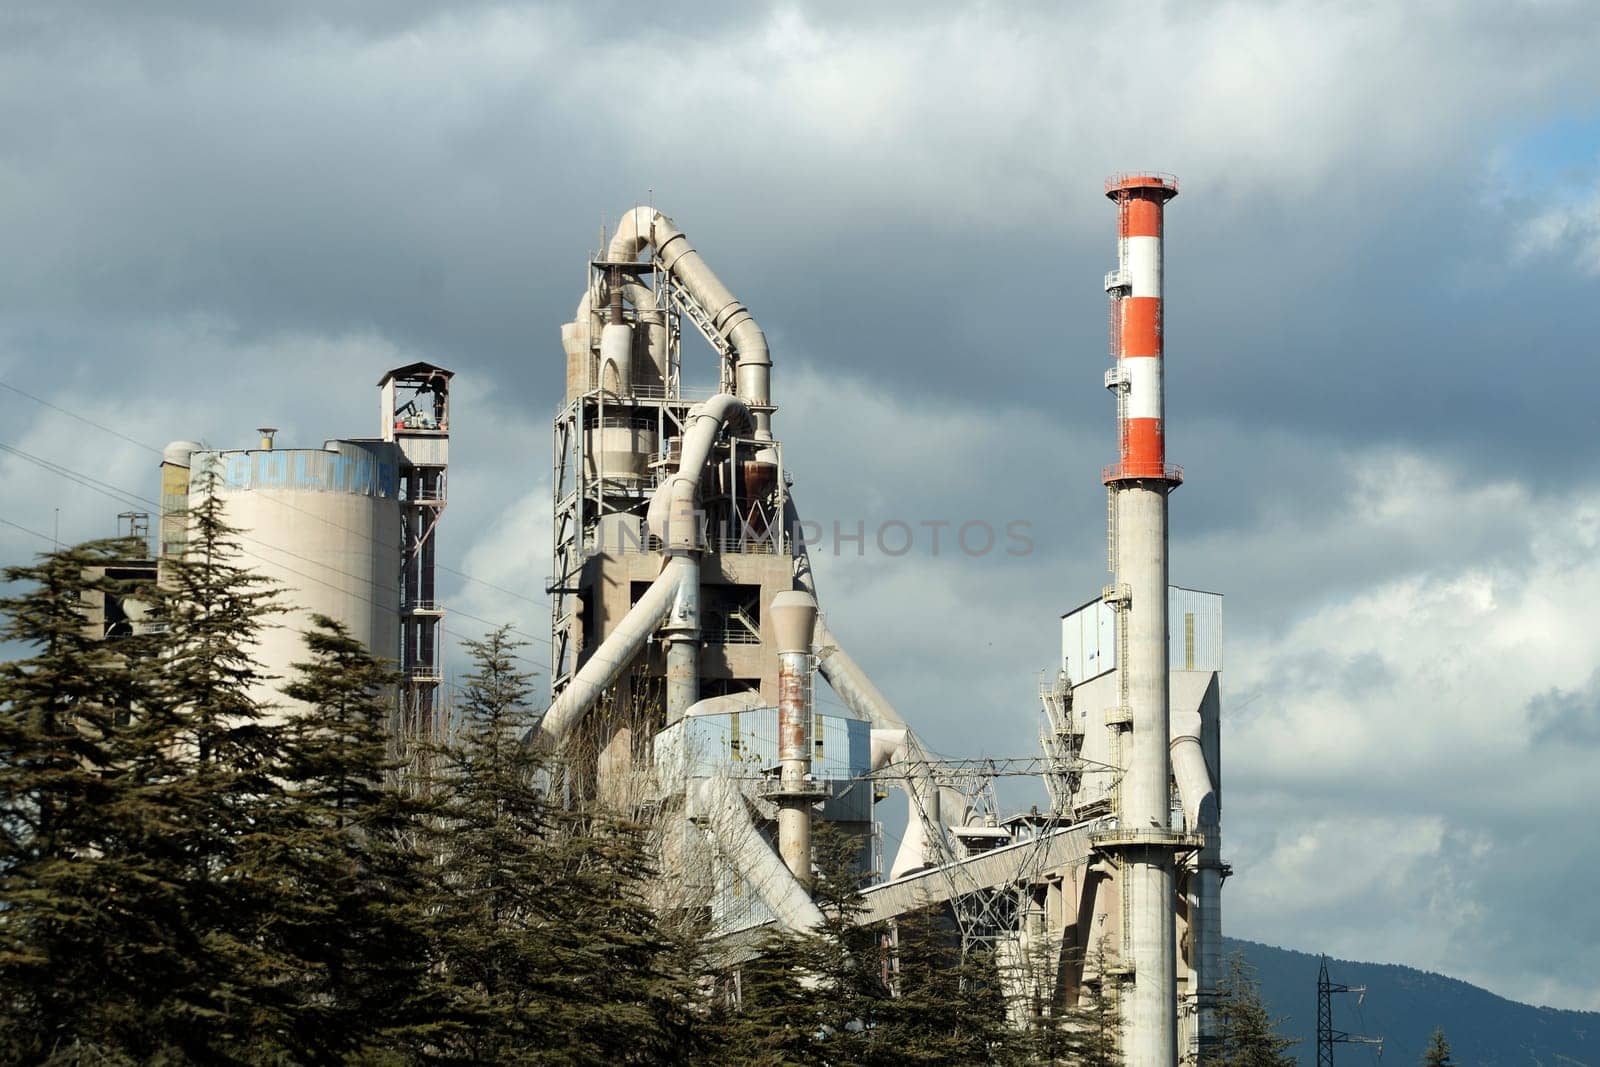 cement plant against the background of a cloudy sky close-up by Annado